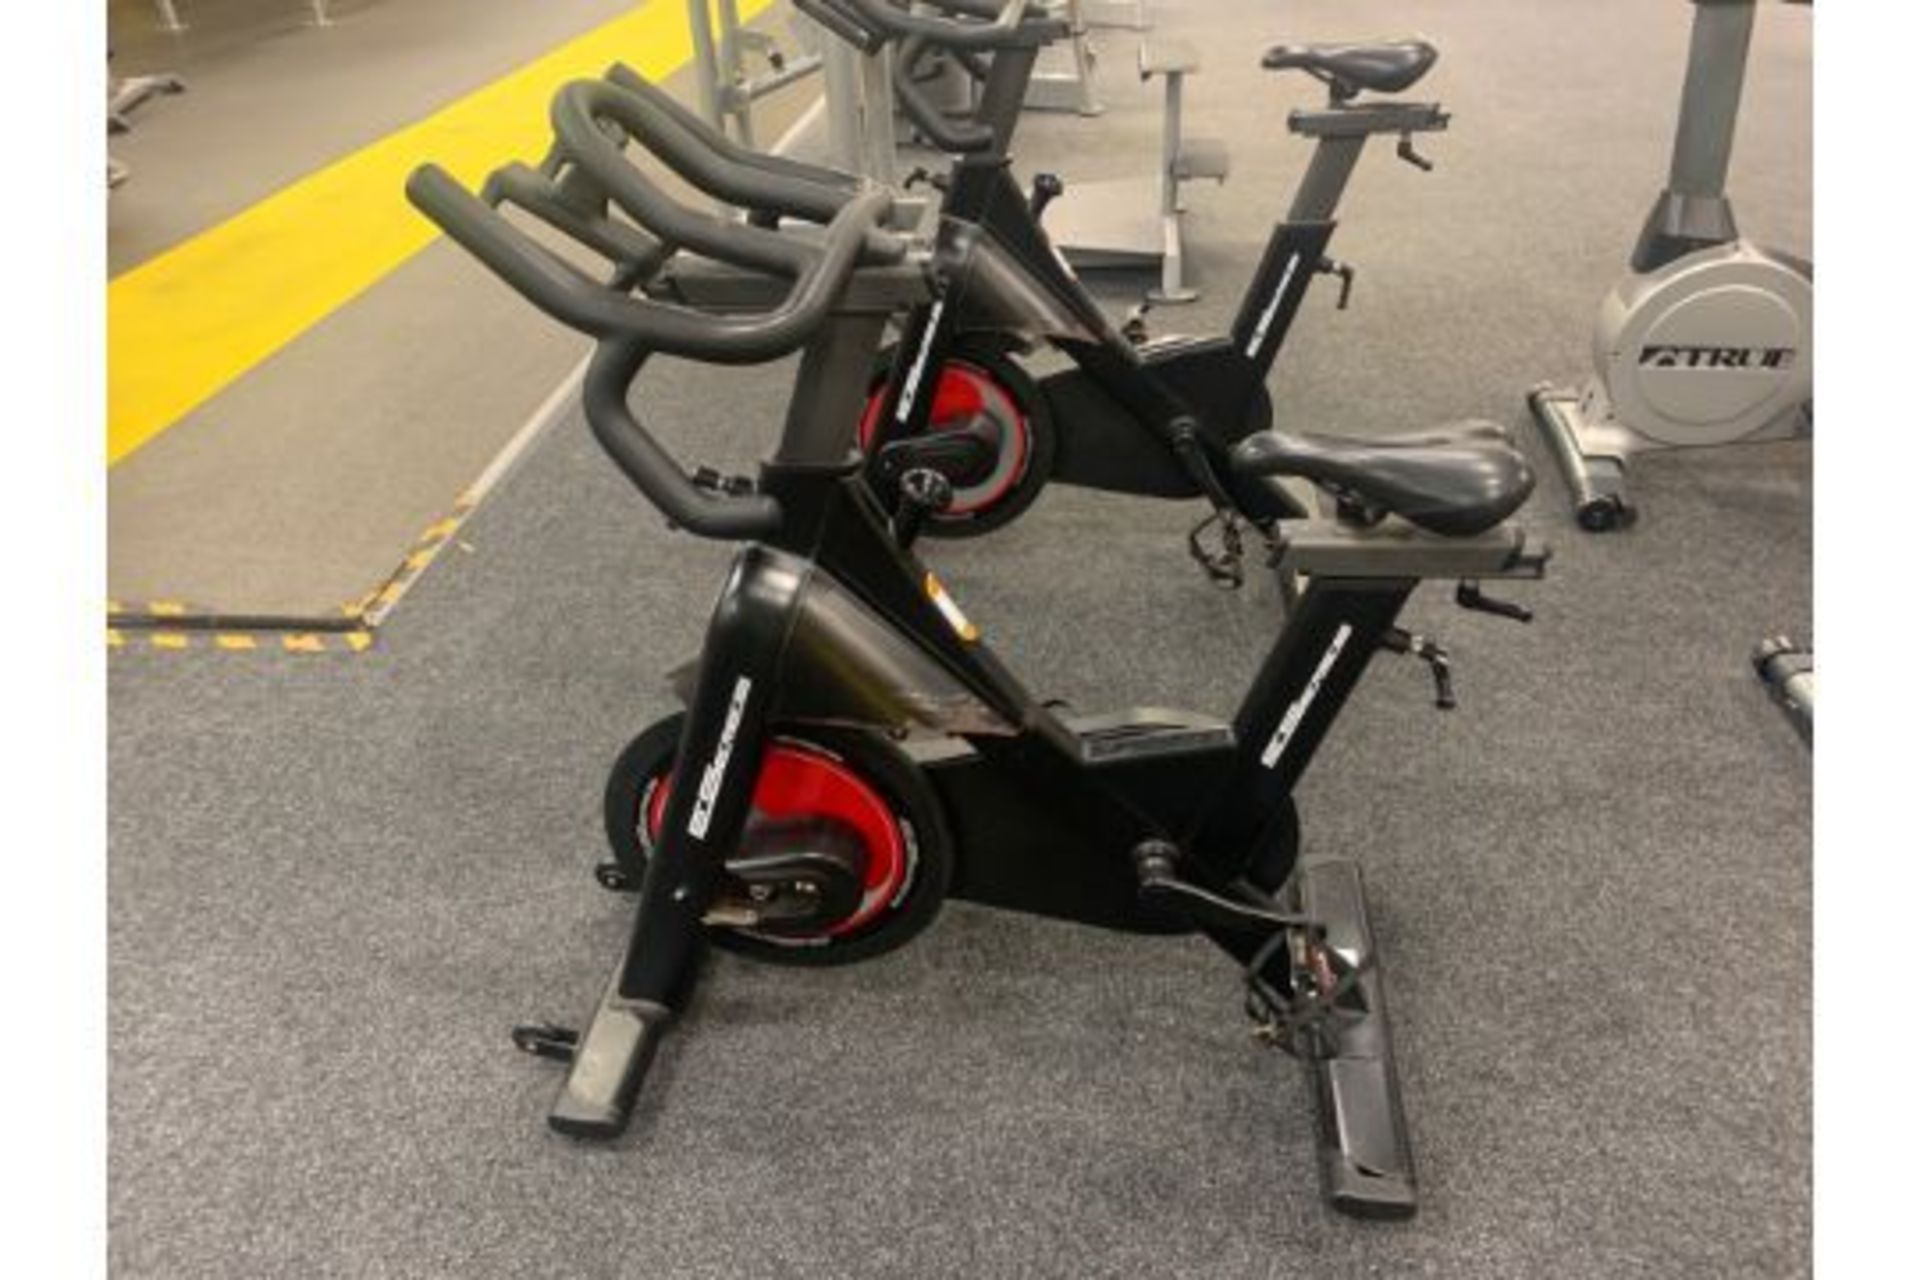 F Series Spin Bike - Image 2 of 5